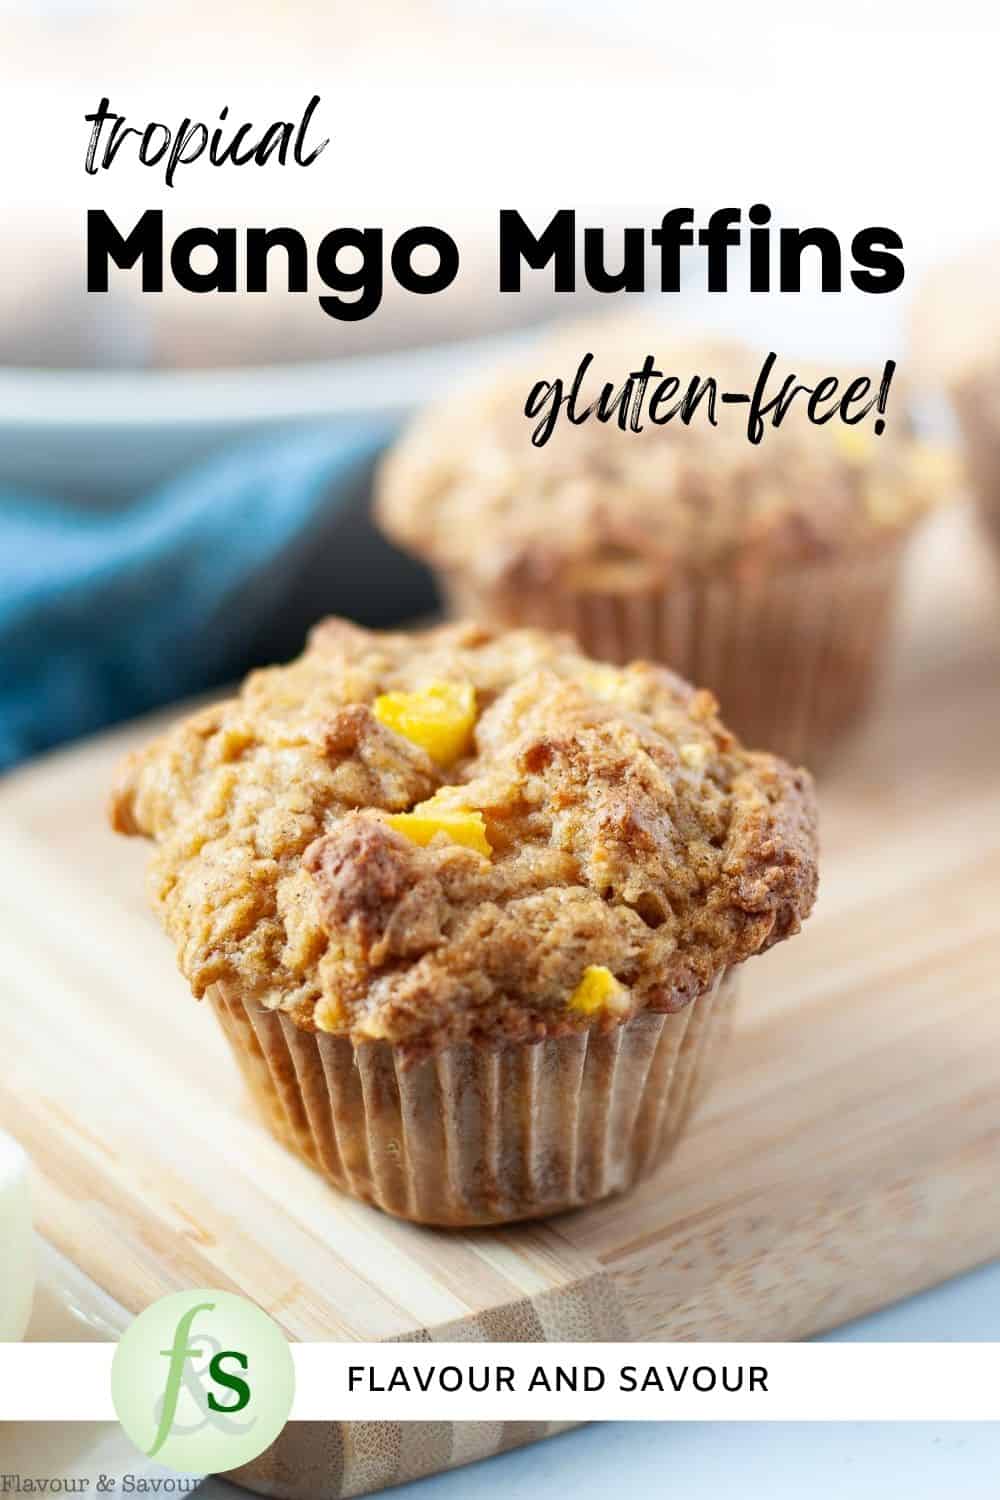 These tropical mango muffins are made with a gluten-free flour blend and your choice of sweetener. These muffins are bursting with juicy mango flavor and are perfect for breakfast or as a sweet treat. Plus, they're gluten-free, so everyone can enjoy them.